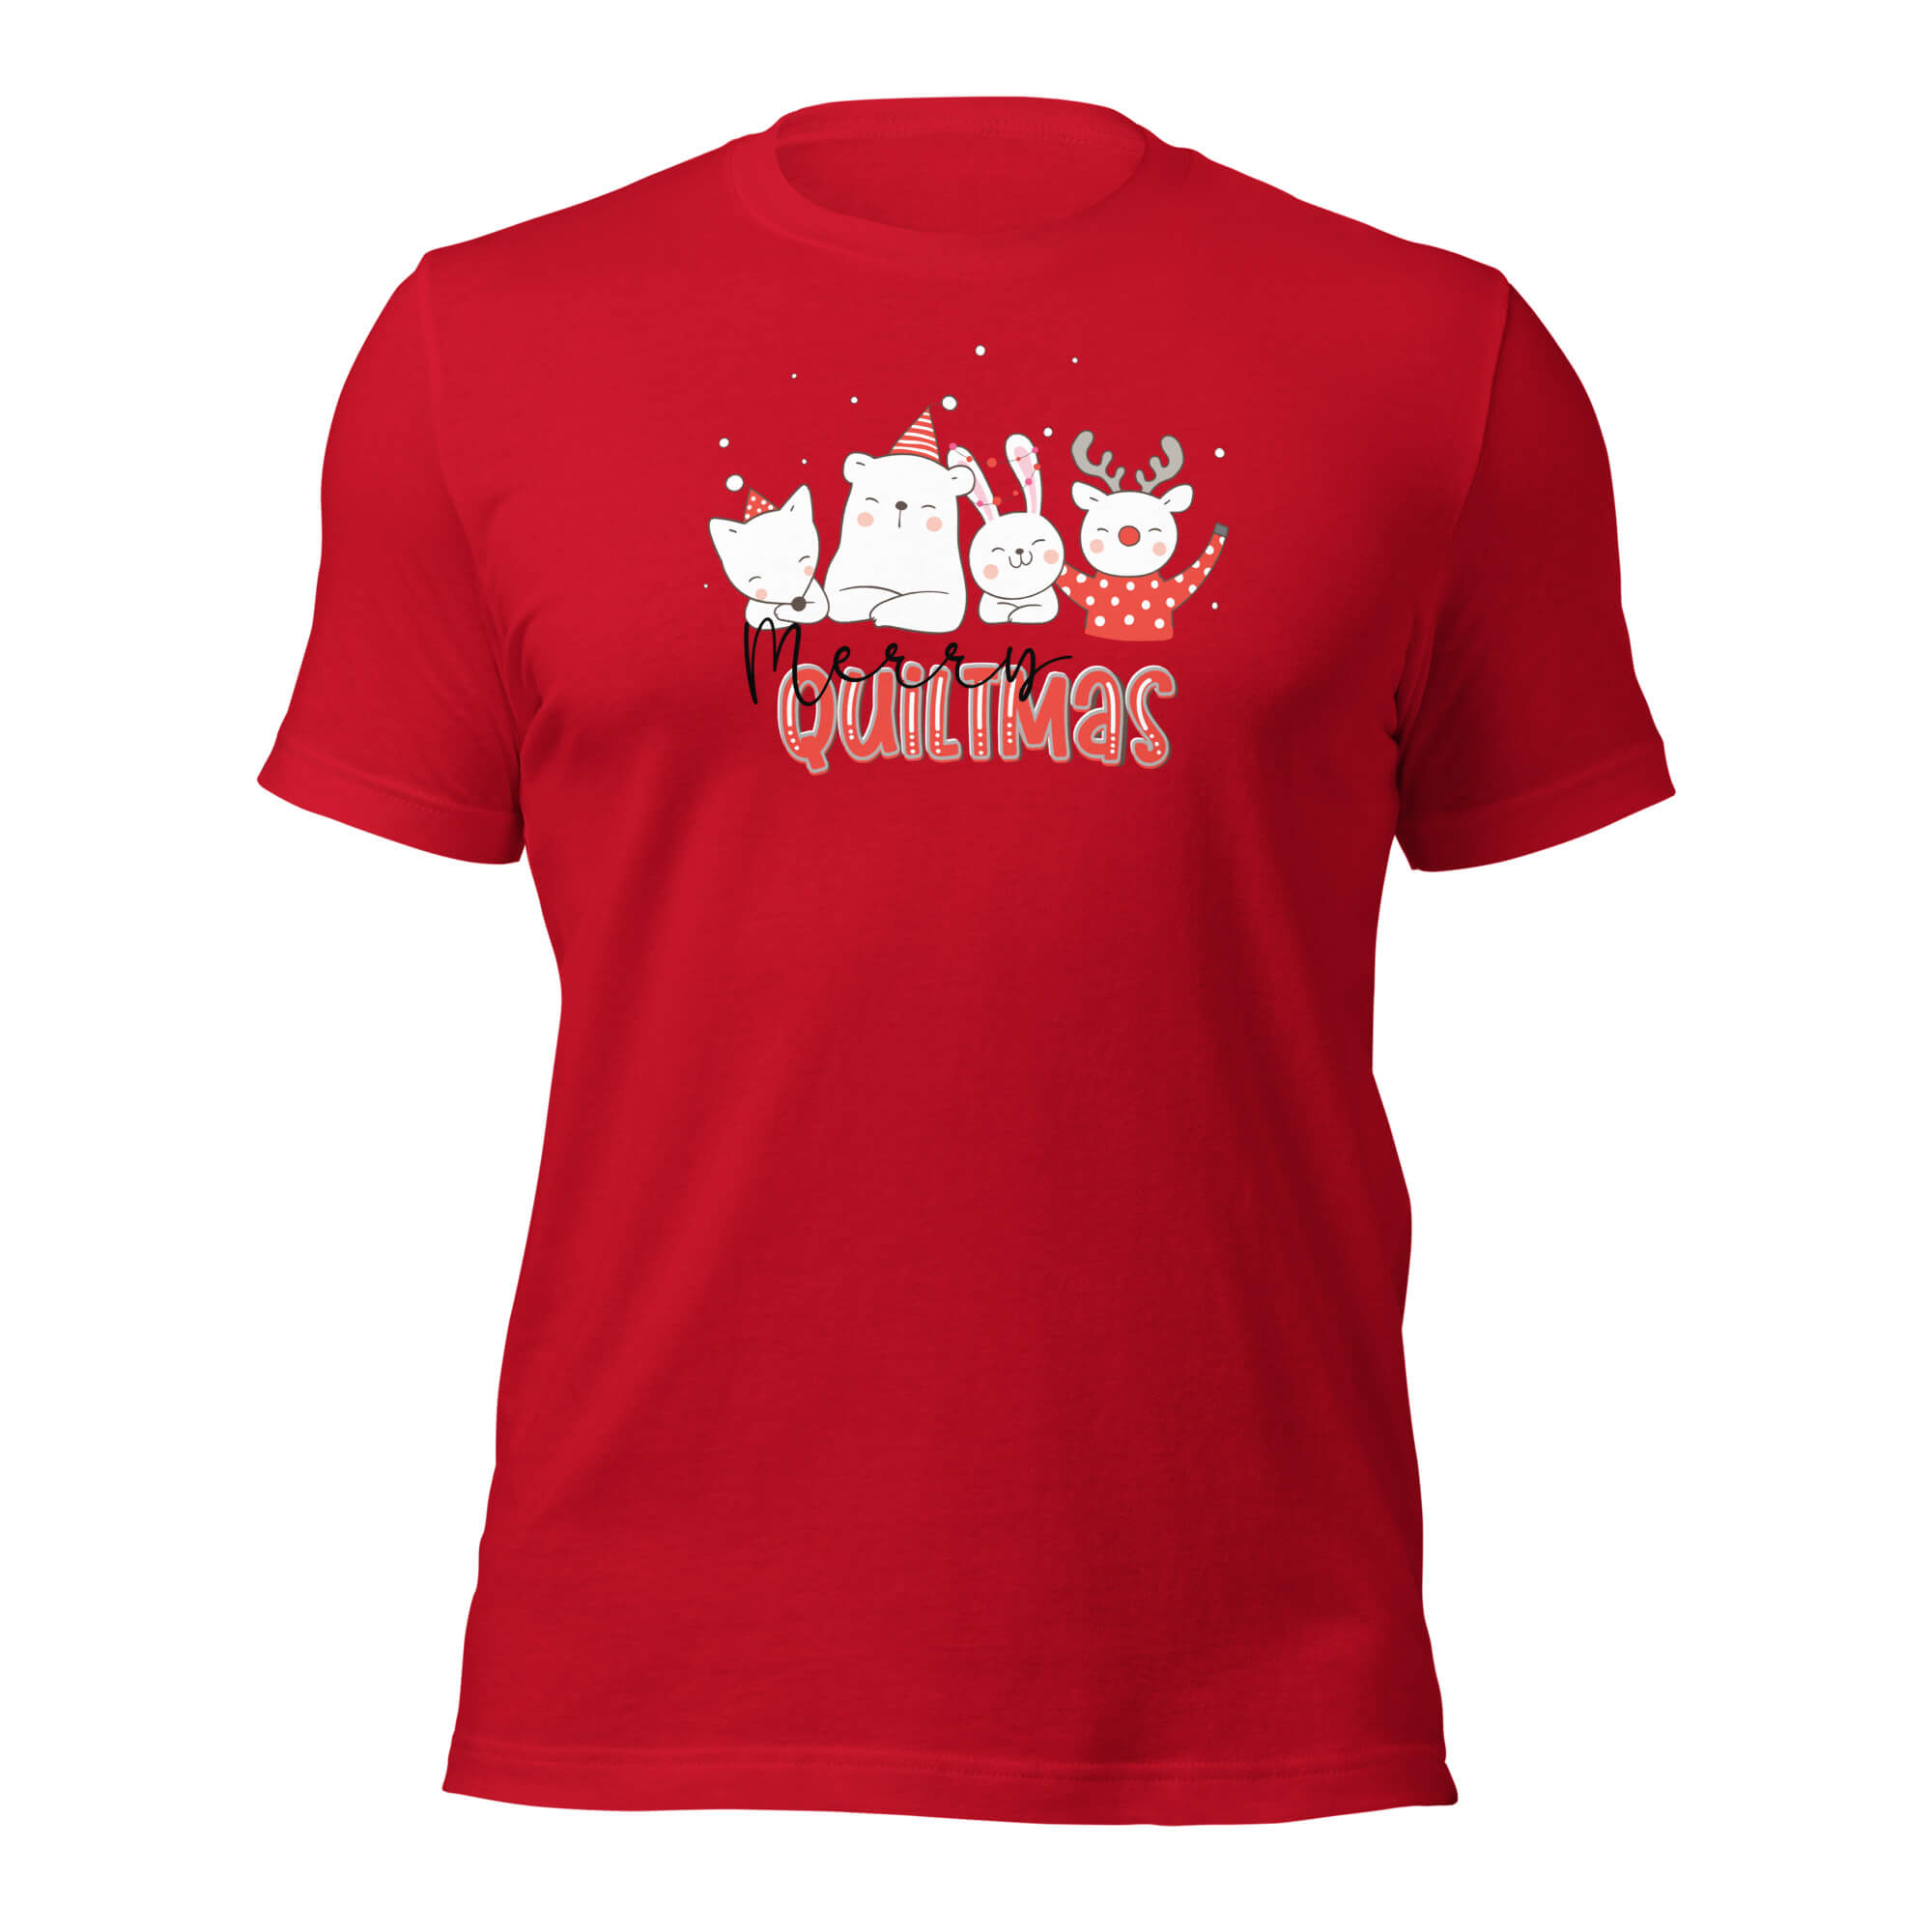 merry-quiltmas-t-shirt-red